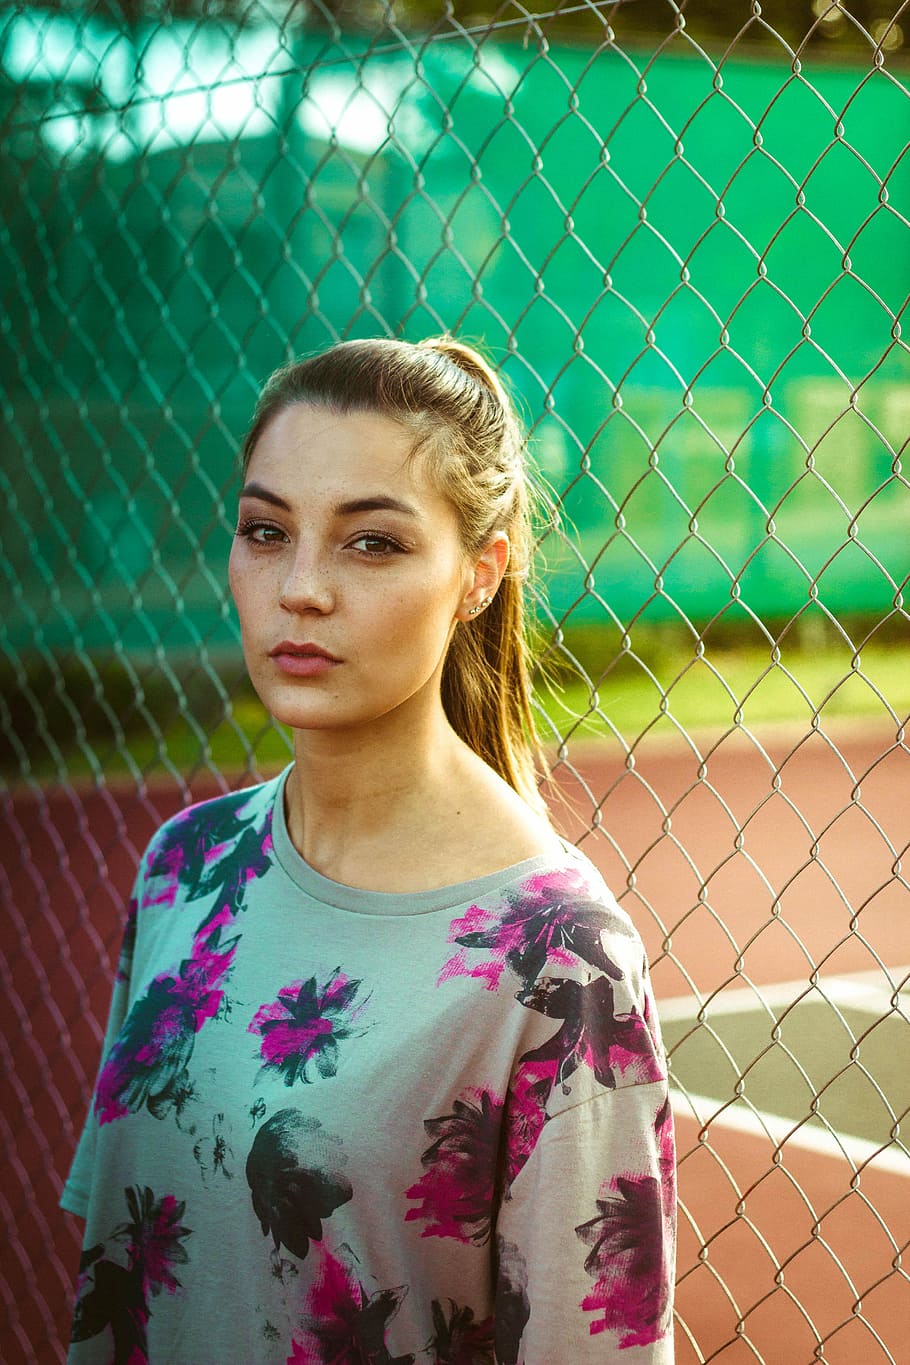 woman wearing floral top beside chain link fence during day, woman wearing multicolored floral shirt standing beside gray metal fence during daytime, HD wallpaper